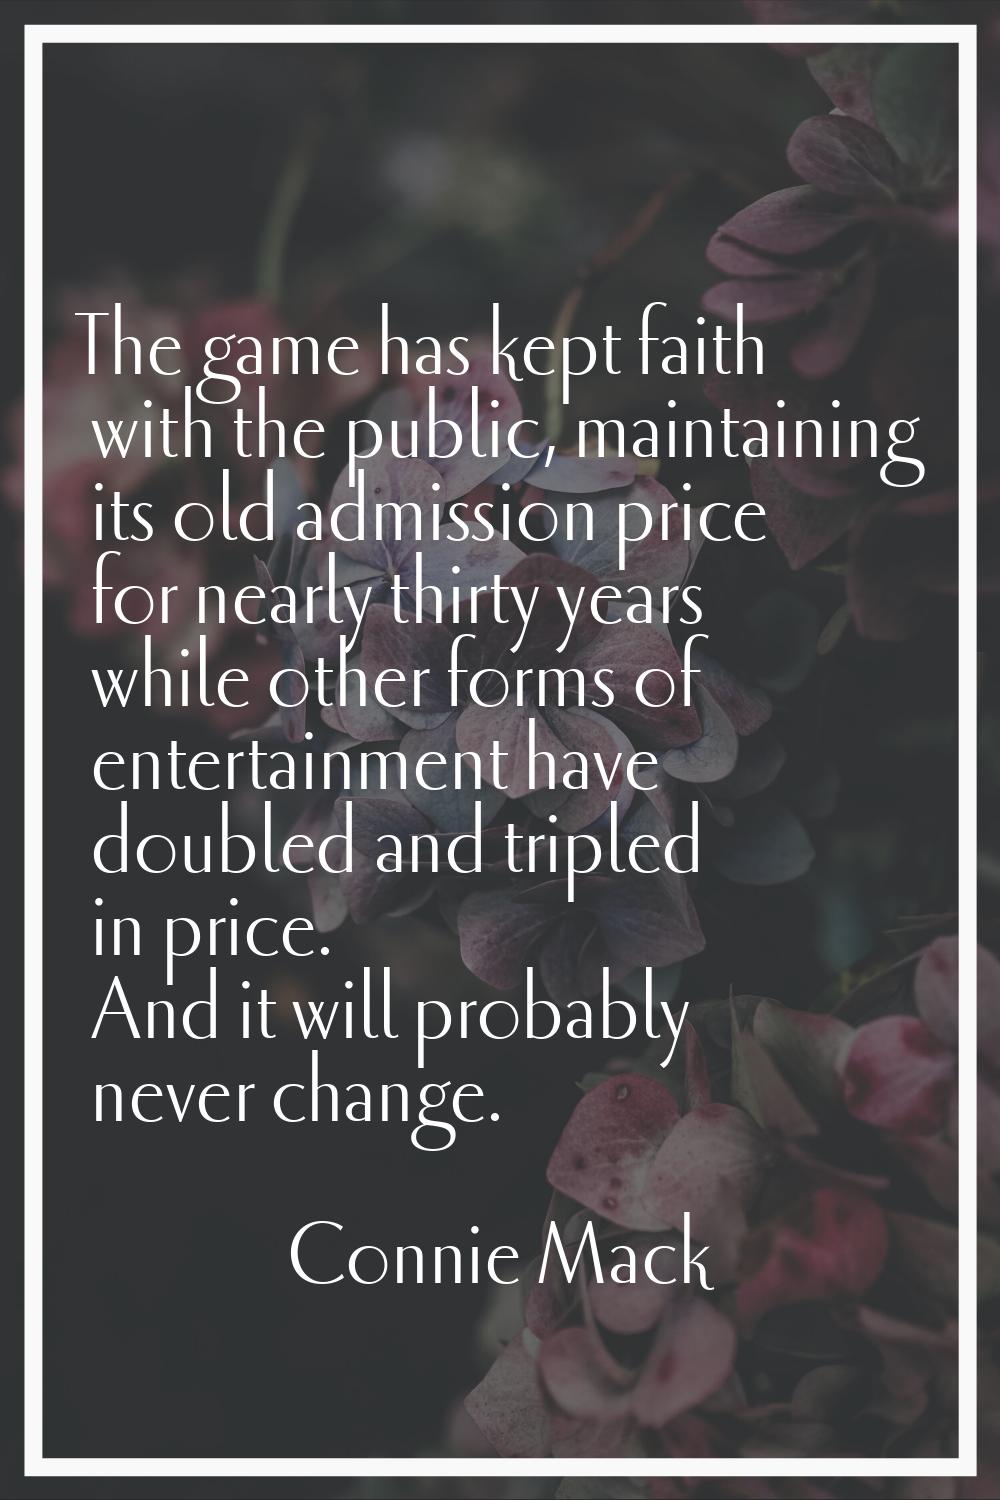 The game has kept faith with the public, maintaining its old admission price for nearly thirty year